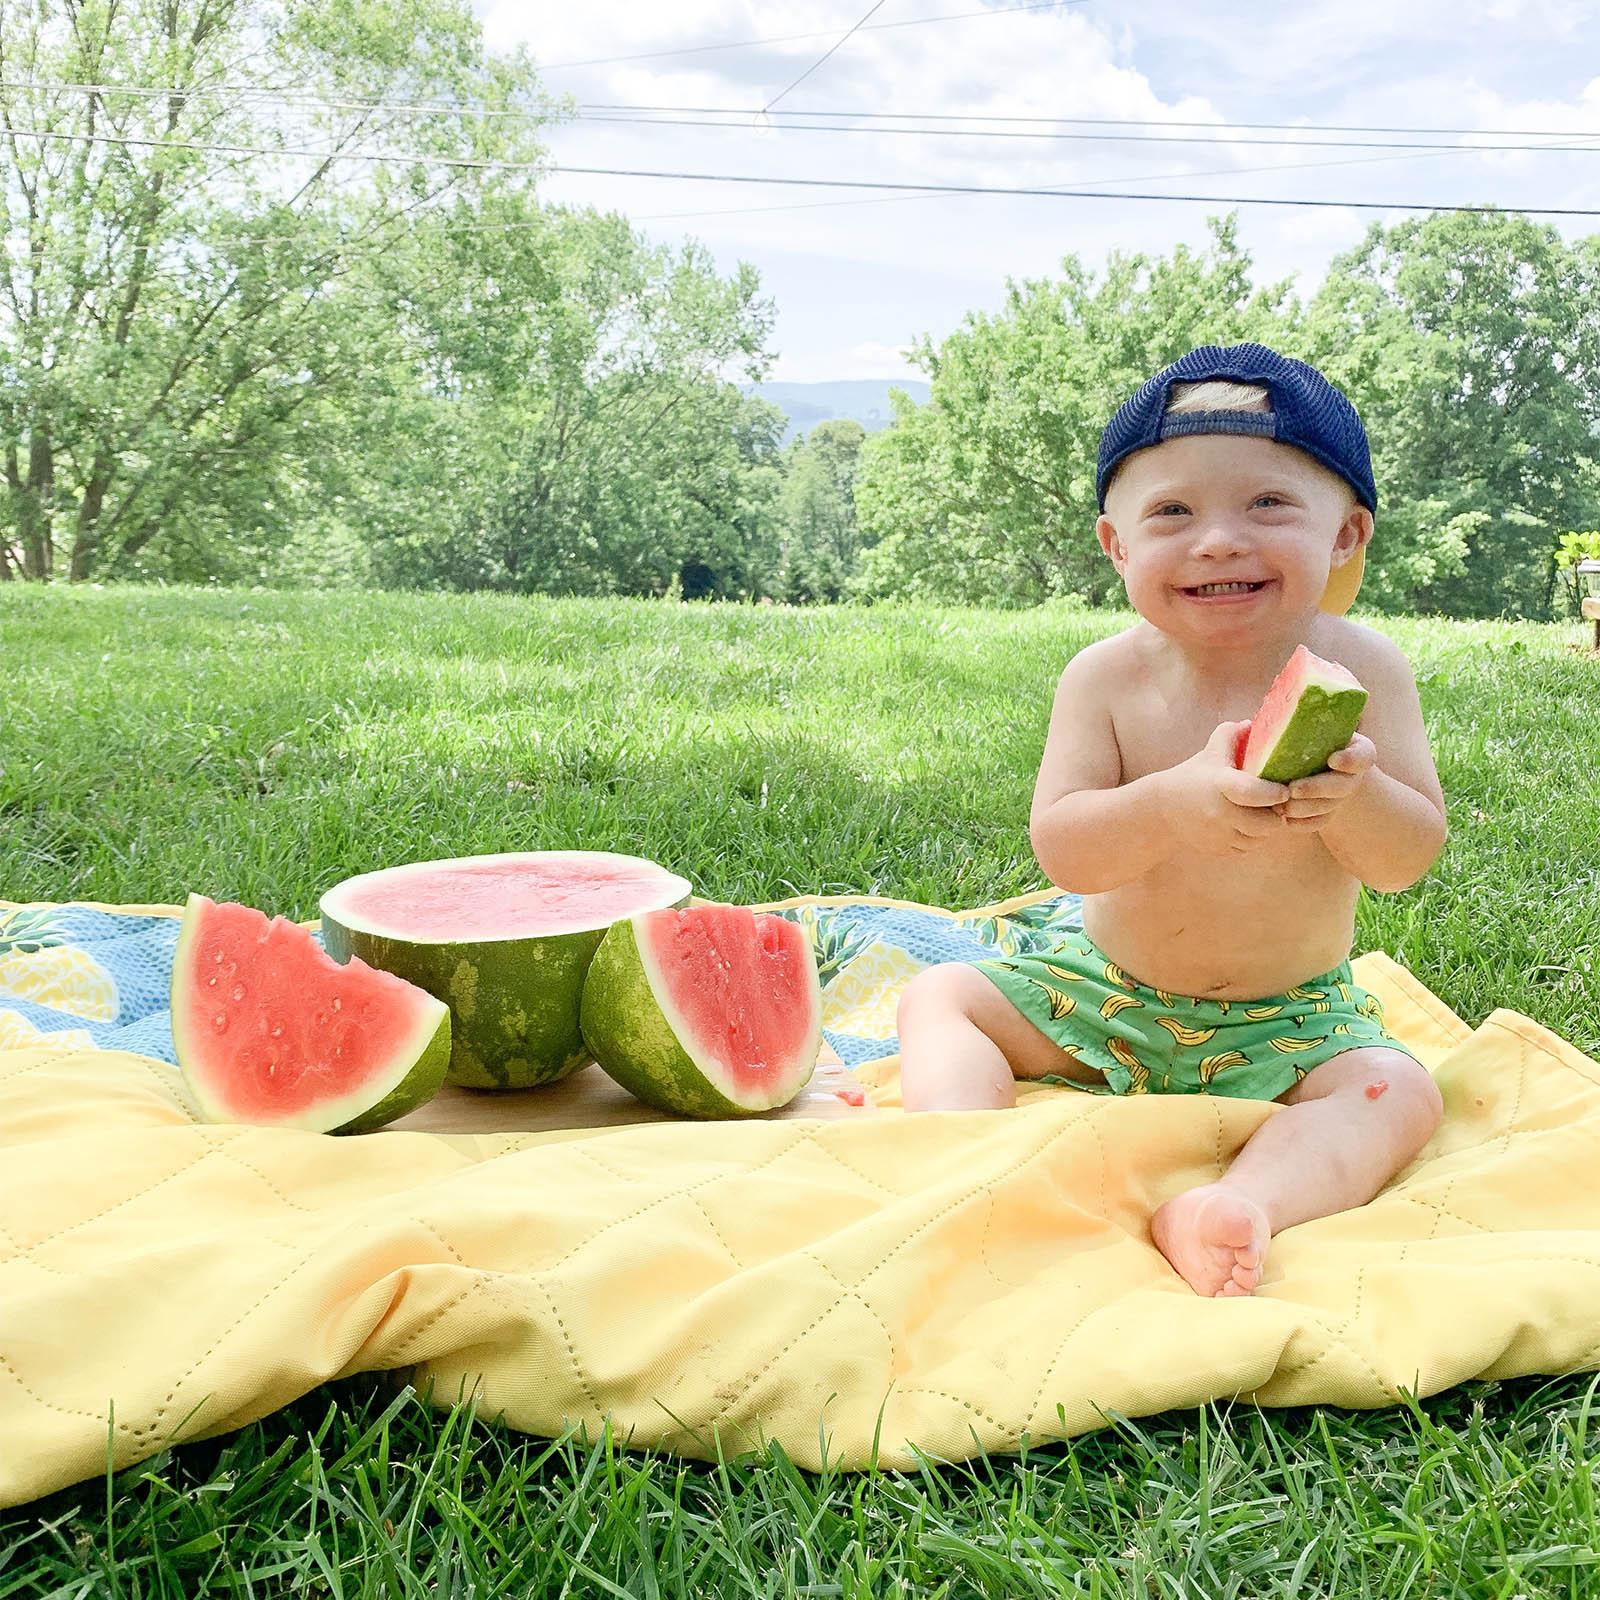 Young boy with down syndrome eating watermelons